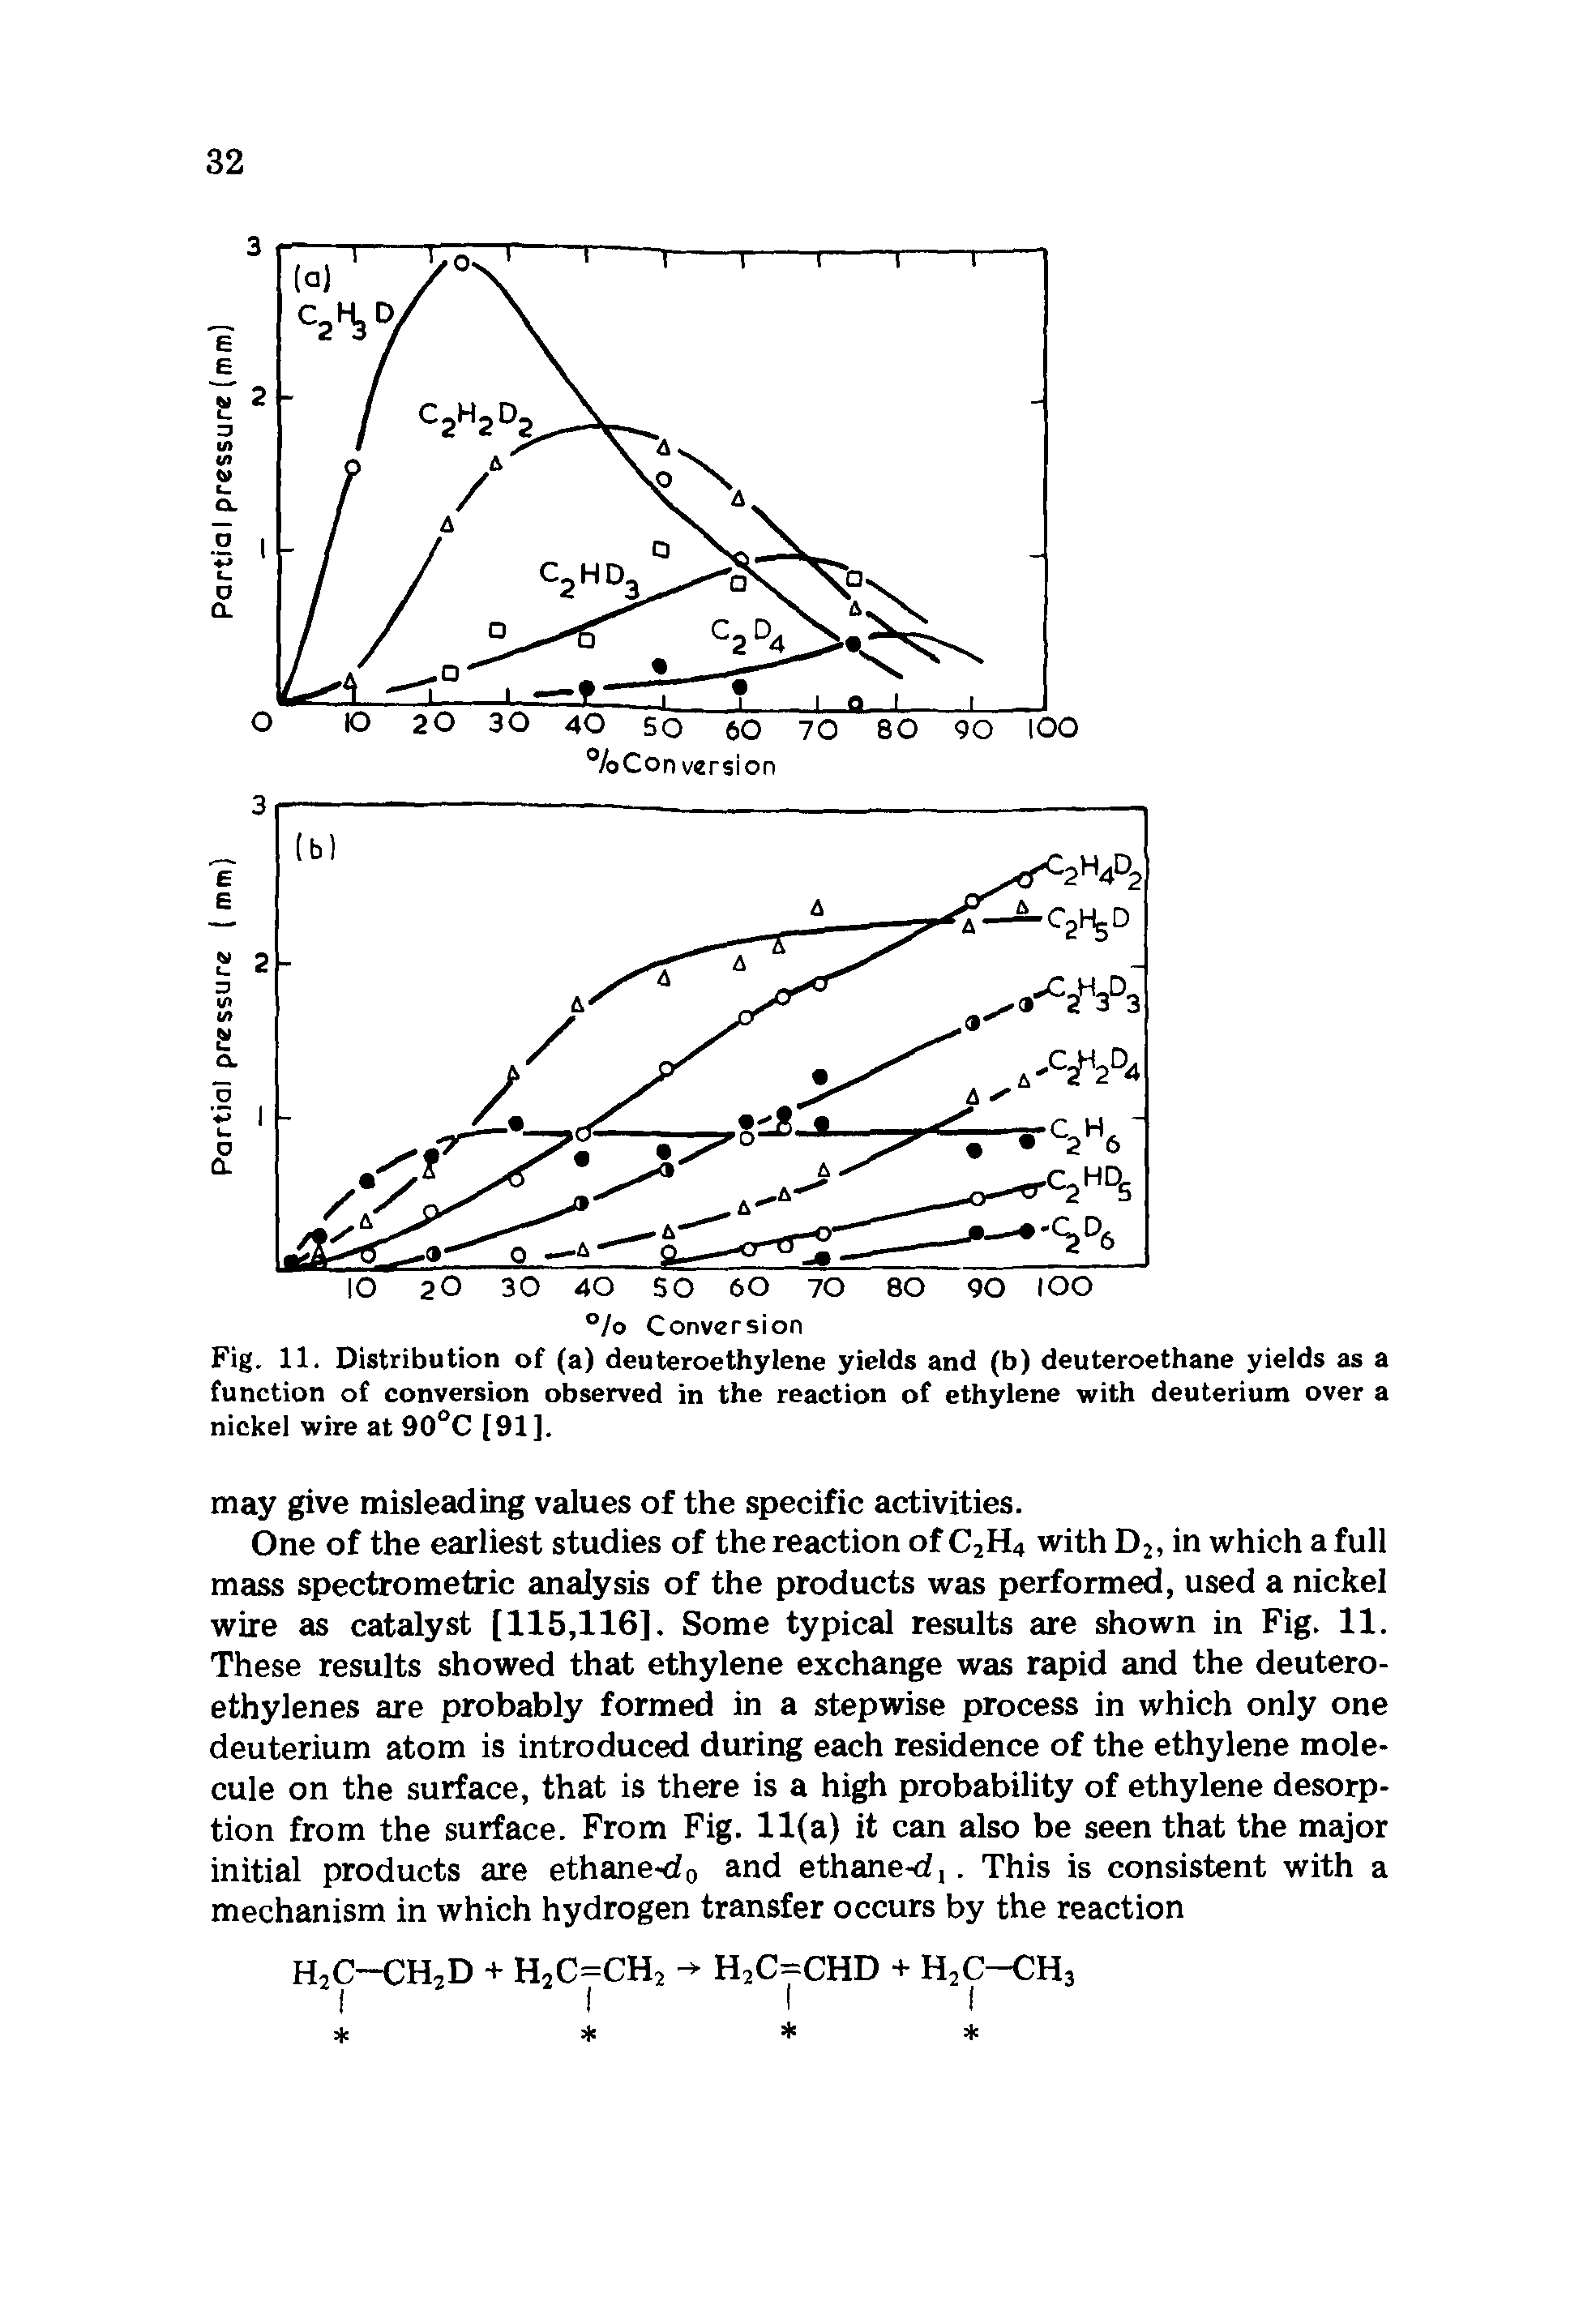 Fig. 11. Distribution of (a) deuteroethylene yields and (b) deuteroethane yields as a function of conversion observed in the reaction of ethylene with deuterium over a nickel wire at 90°C [91],...